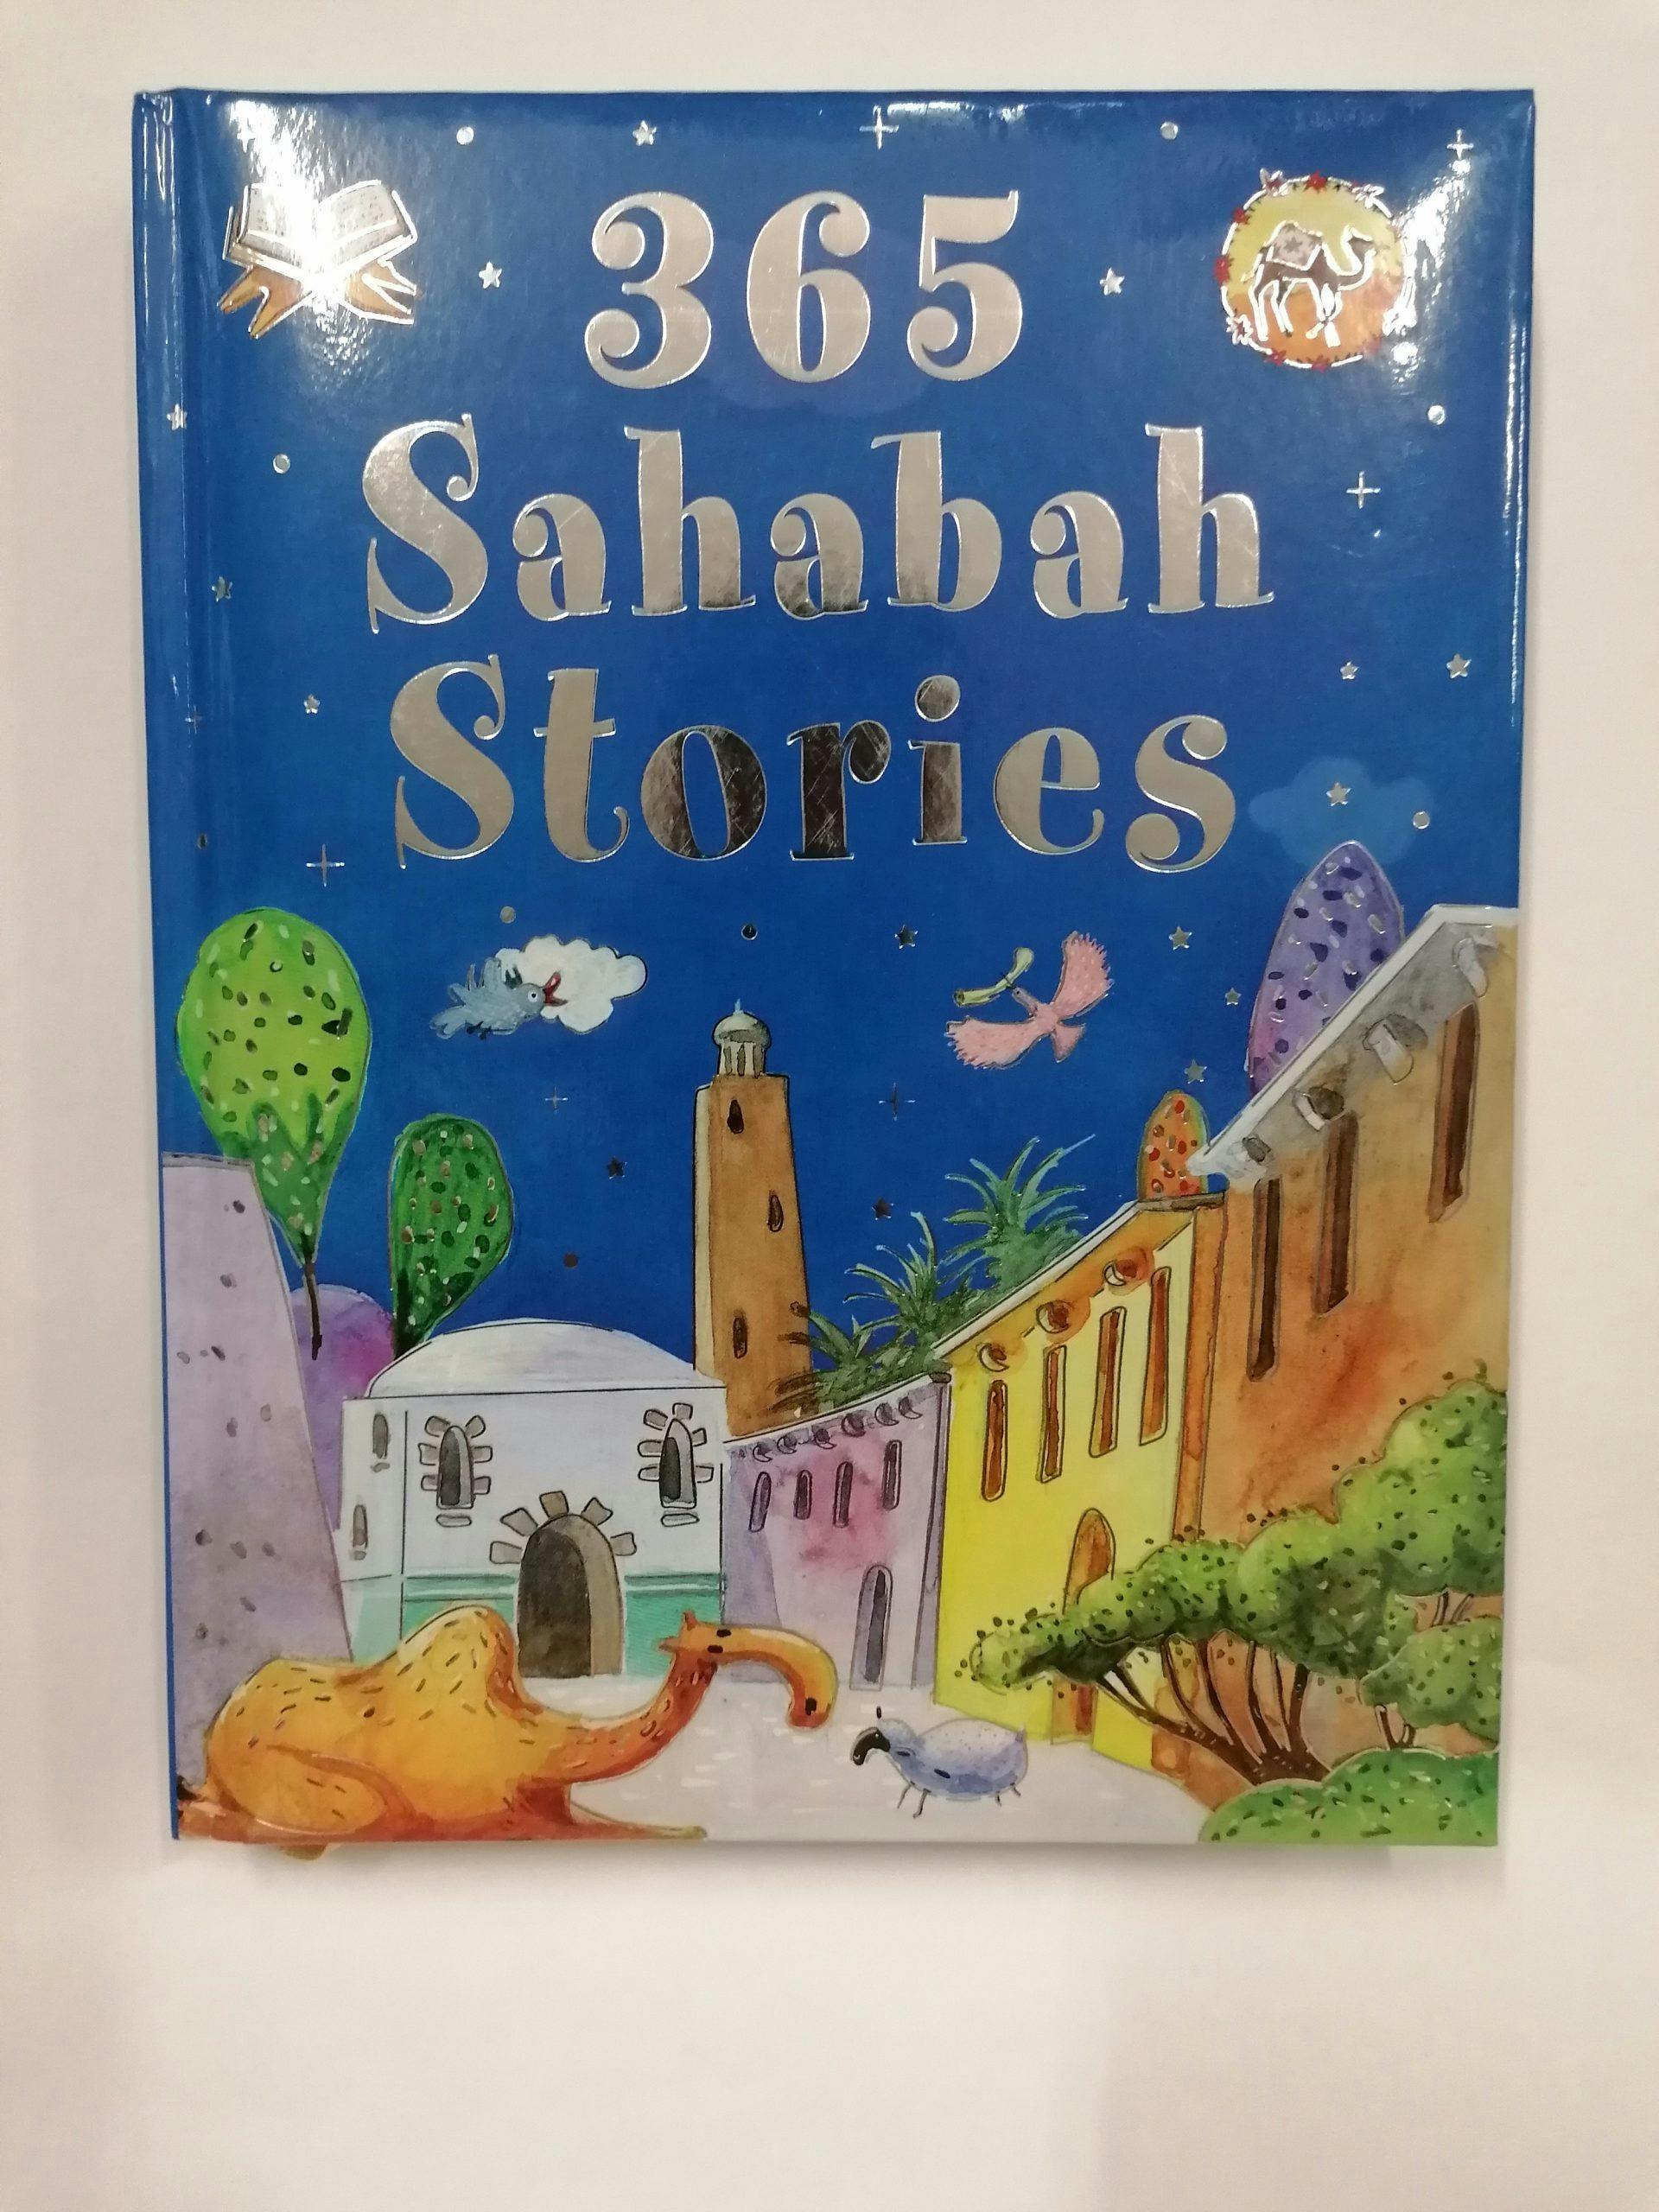 Featured image of 365 Sahabah Stories